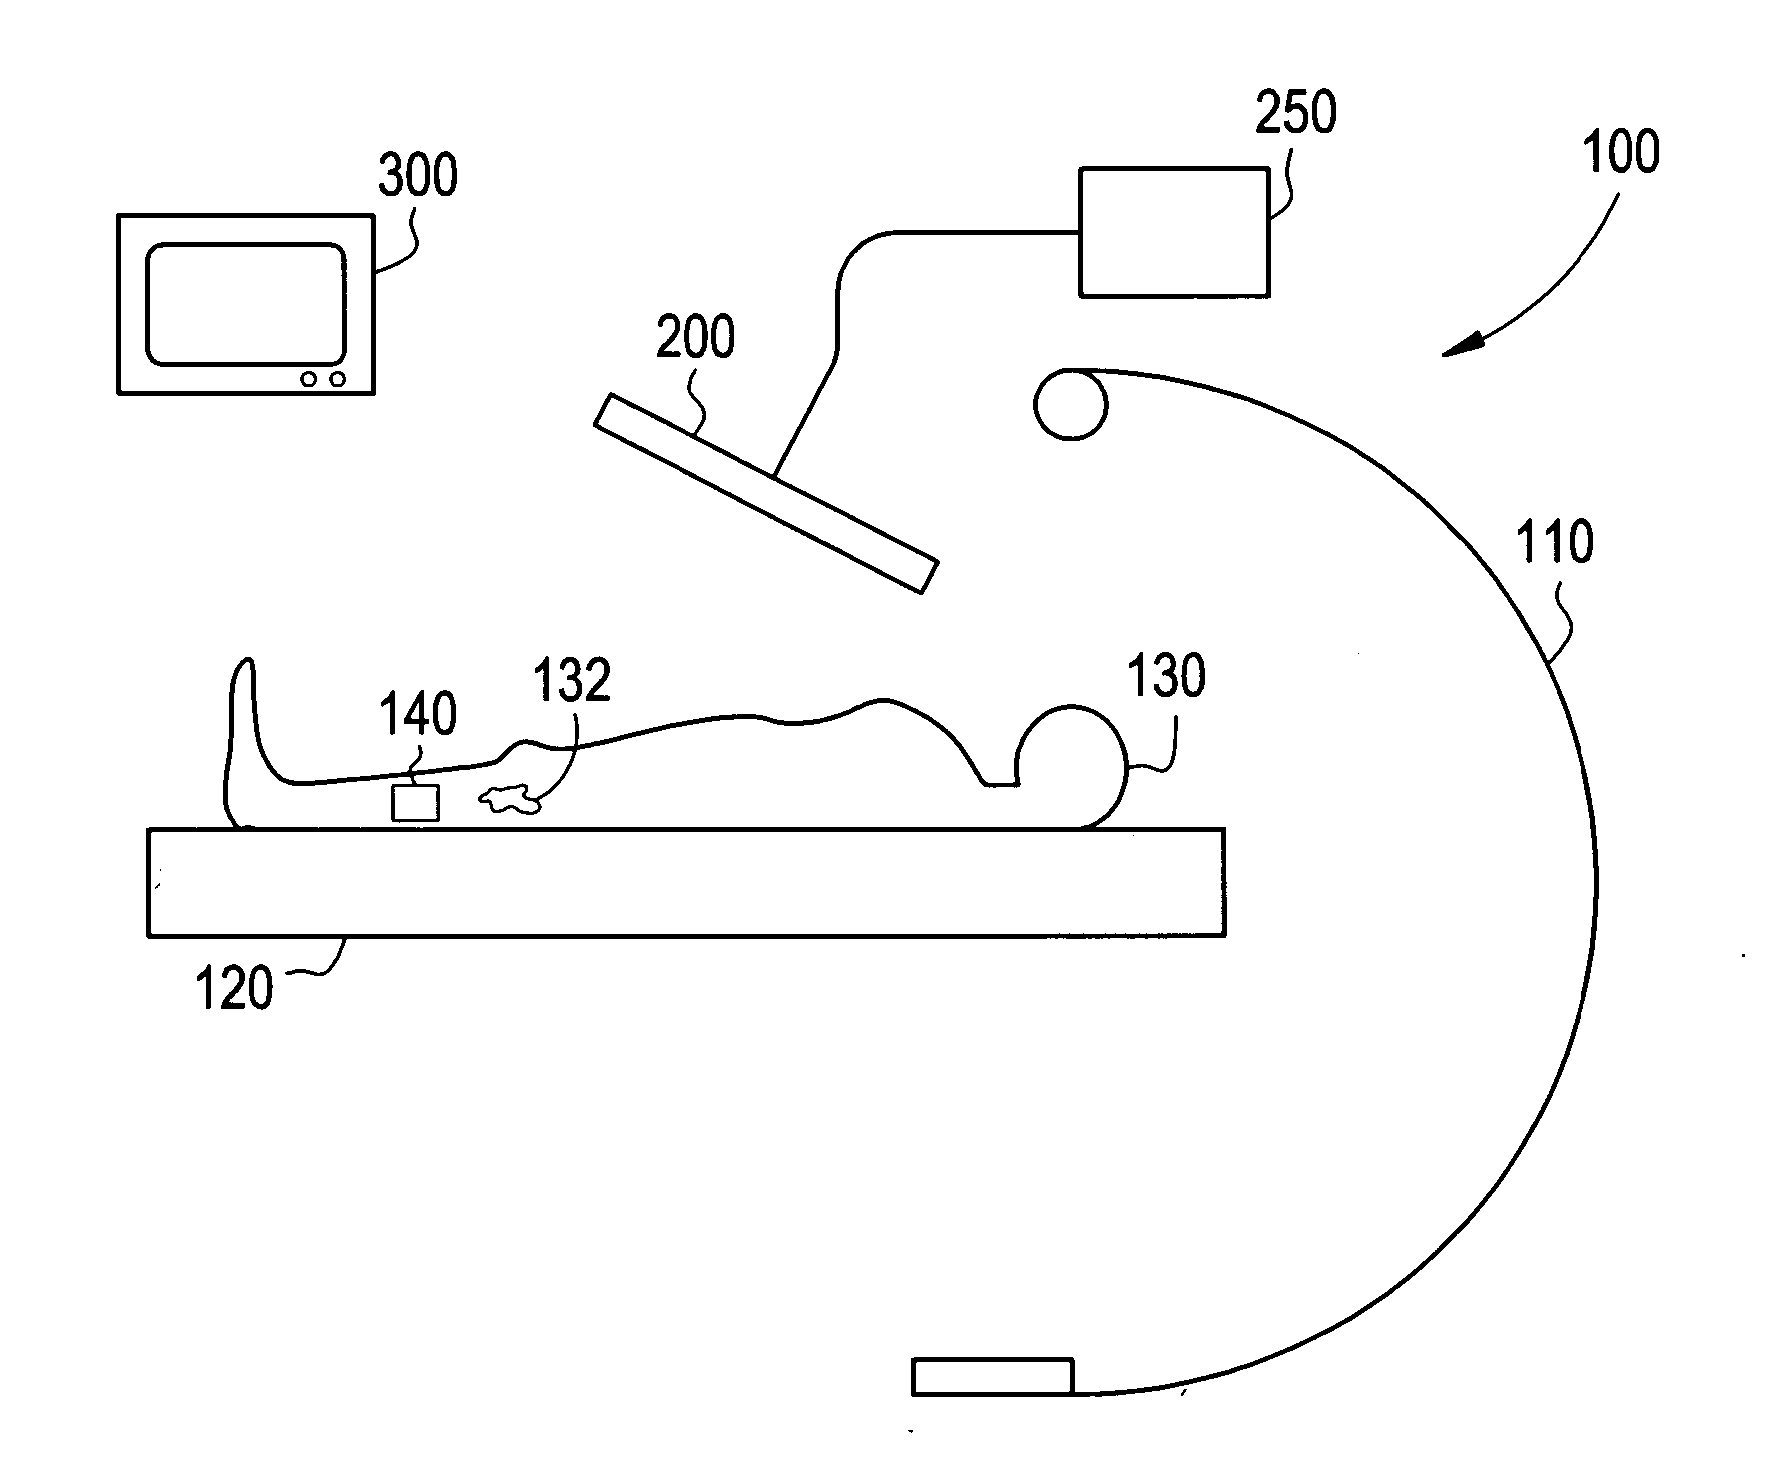 Navigation and visualization of an access needle system